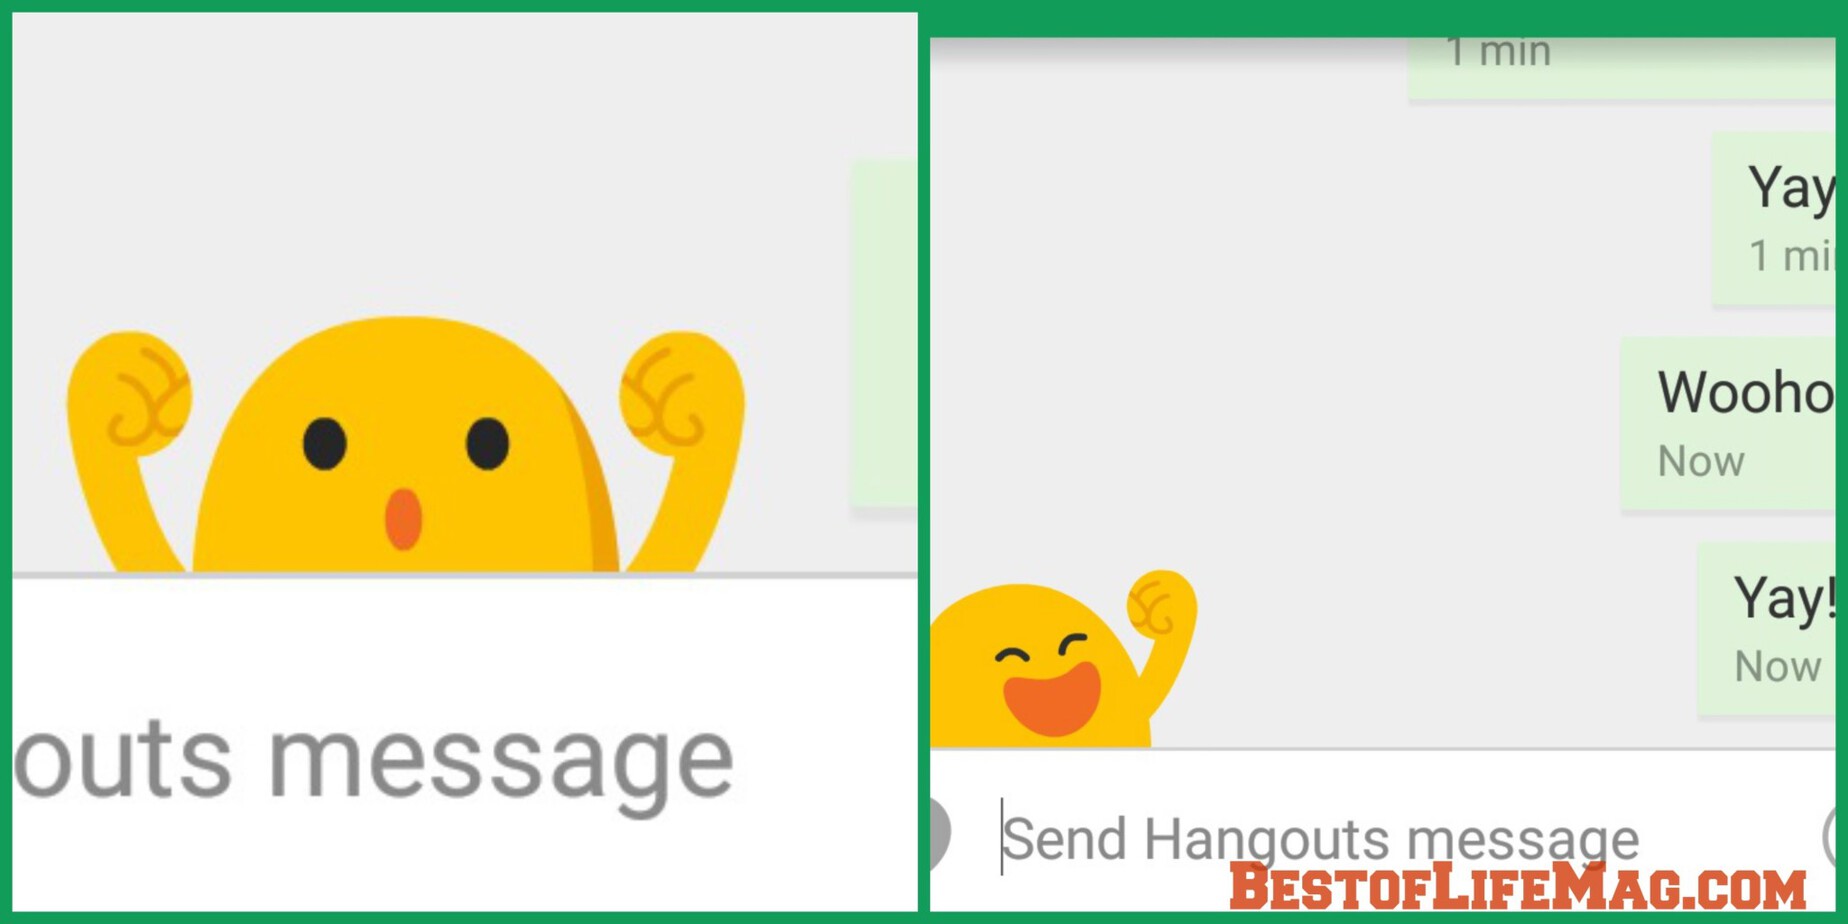 Want to have some fun with Google Hangout? Check out these hidden emoji that you can find with one word or phrase inside Hangouts.